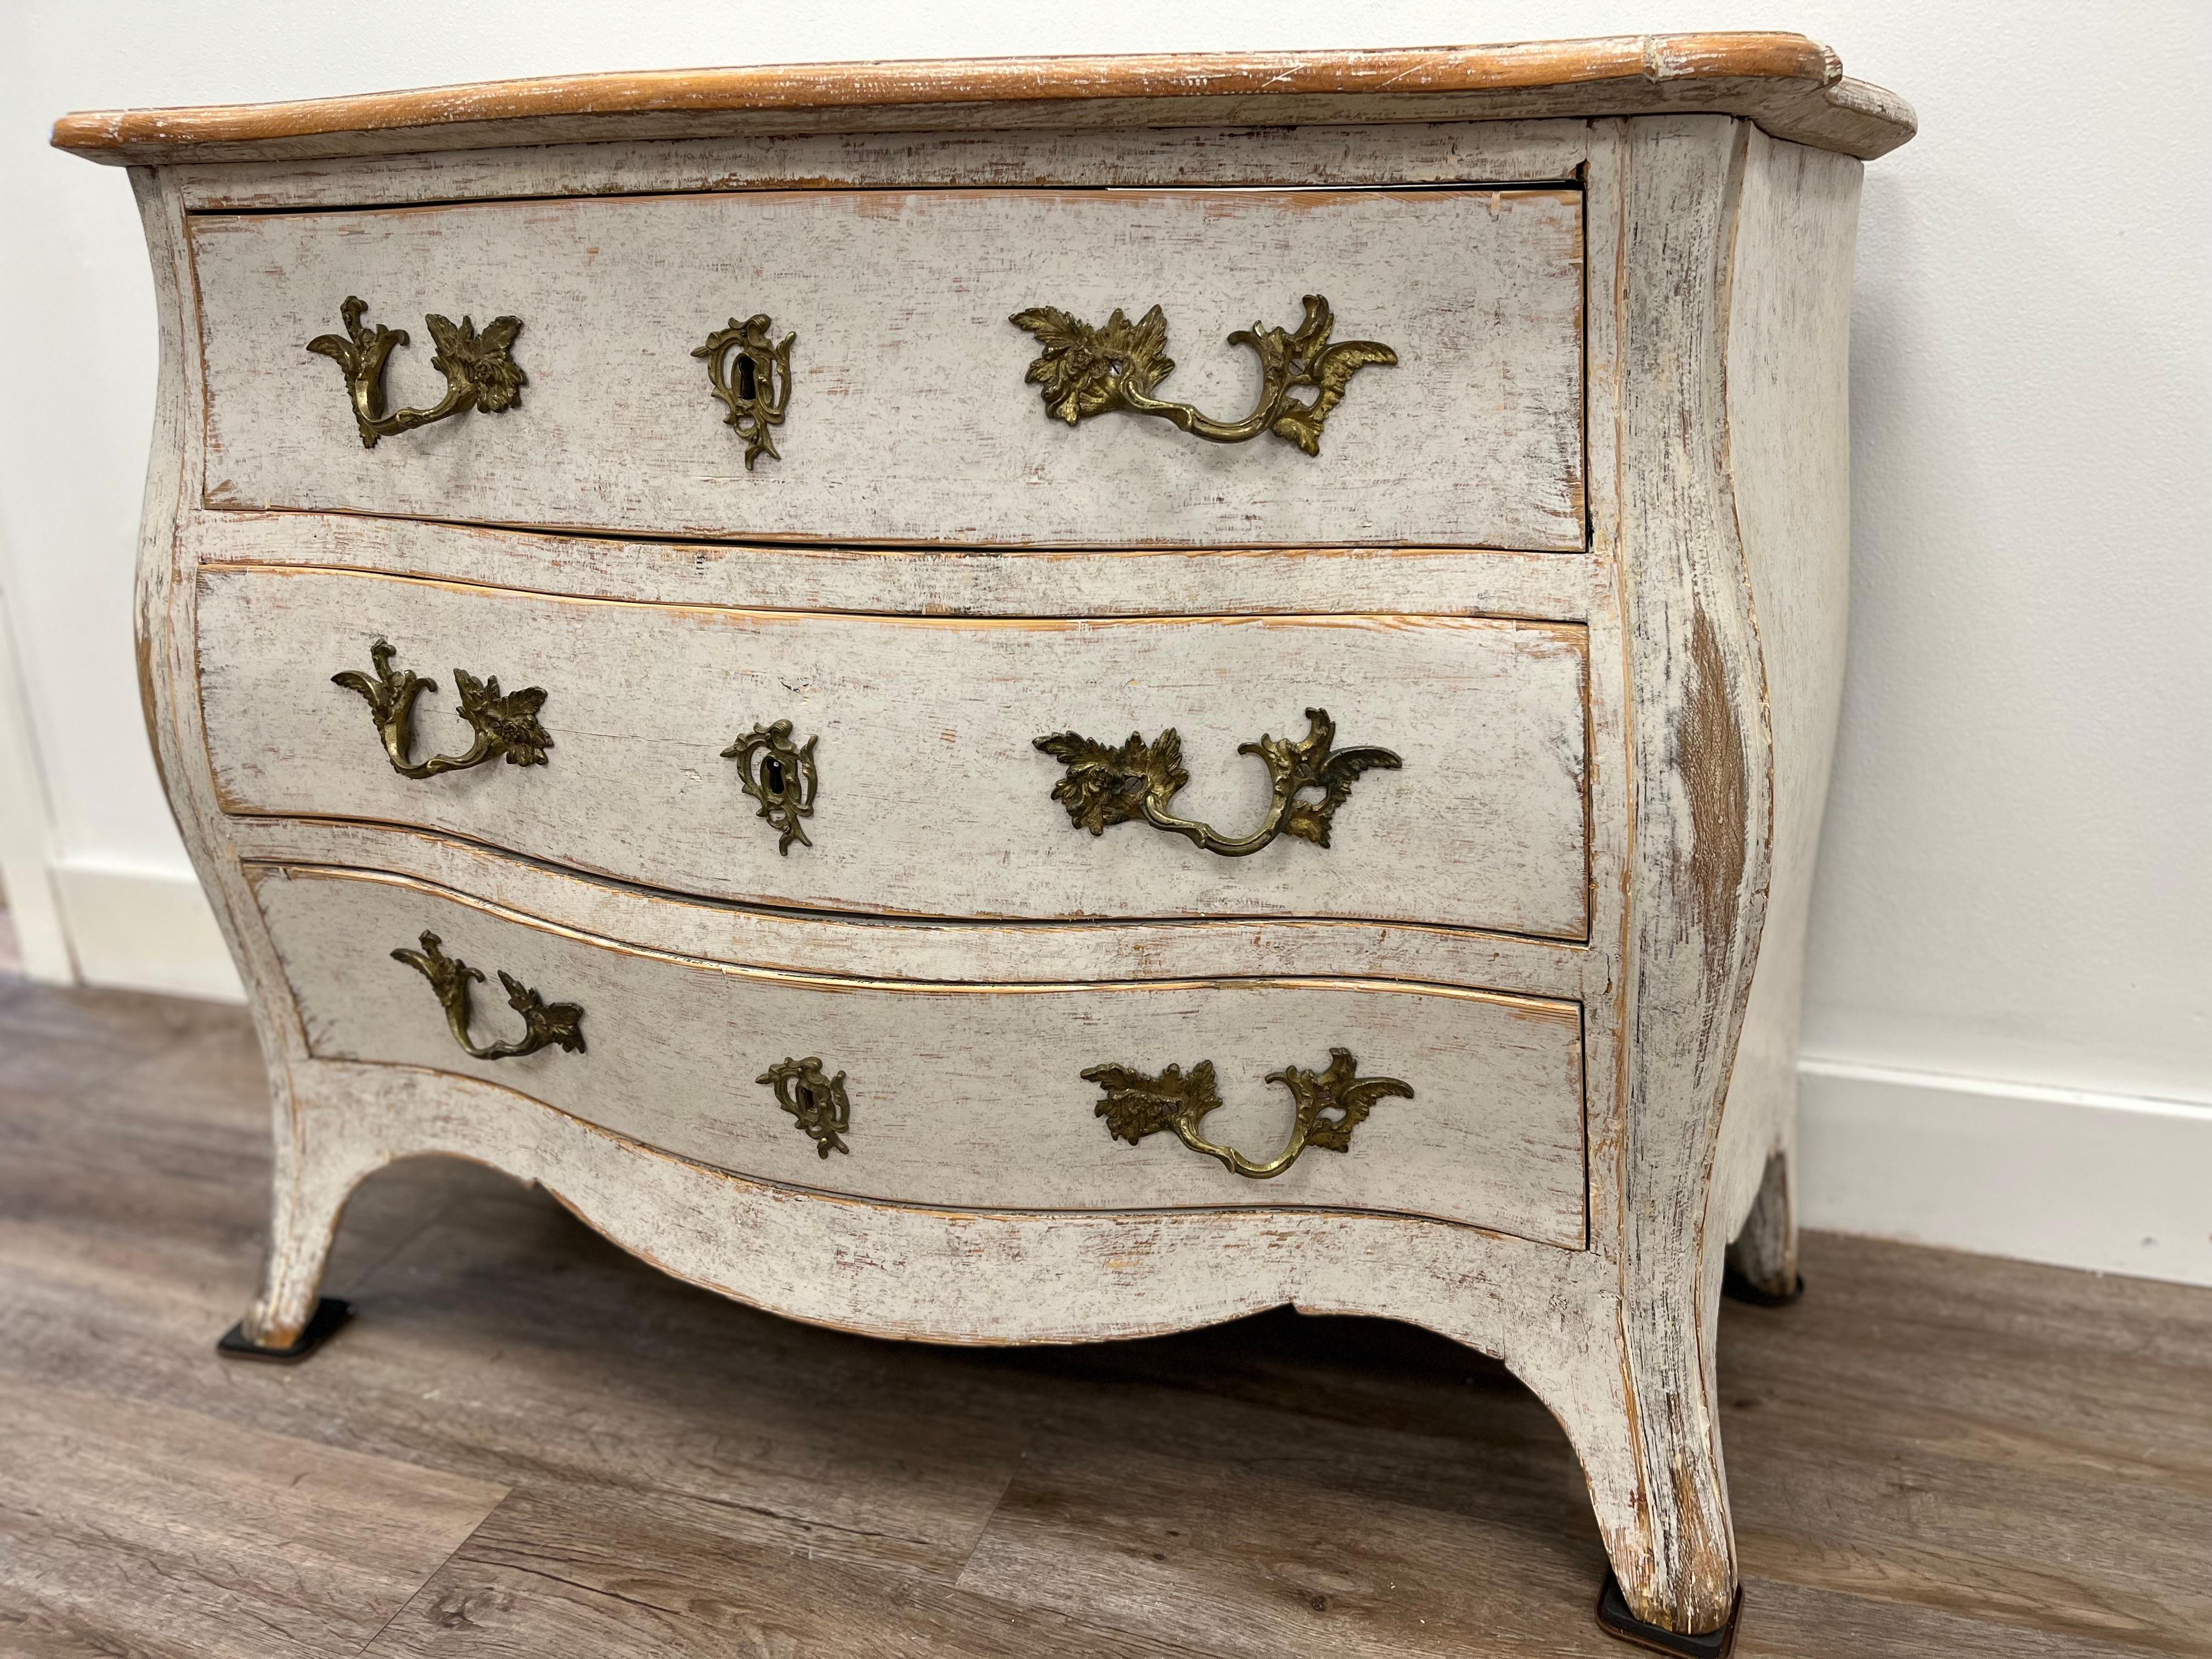 A Swedish Rococo commode with original brass pulls and keyhole covers and later locks. Later soft white paint.